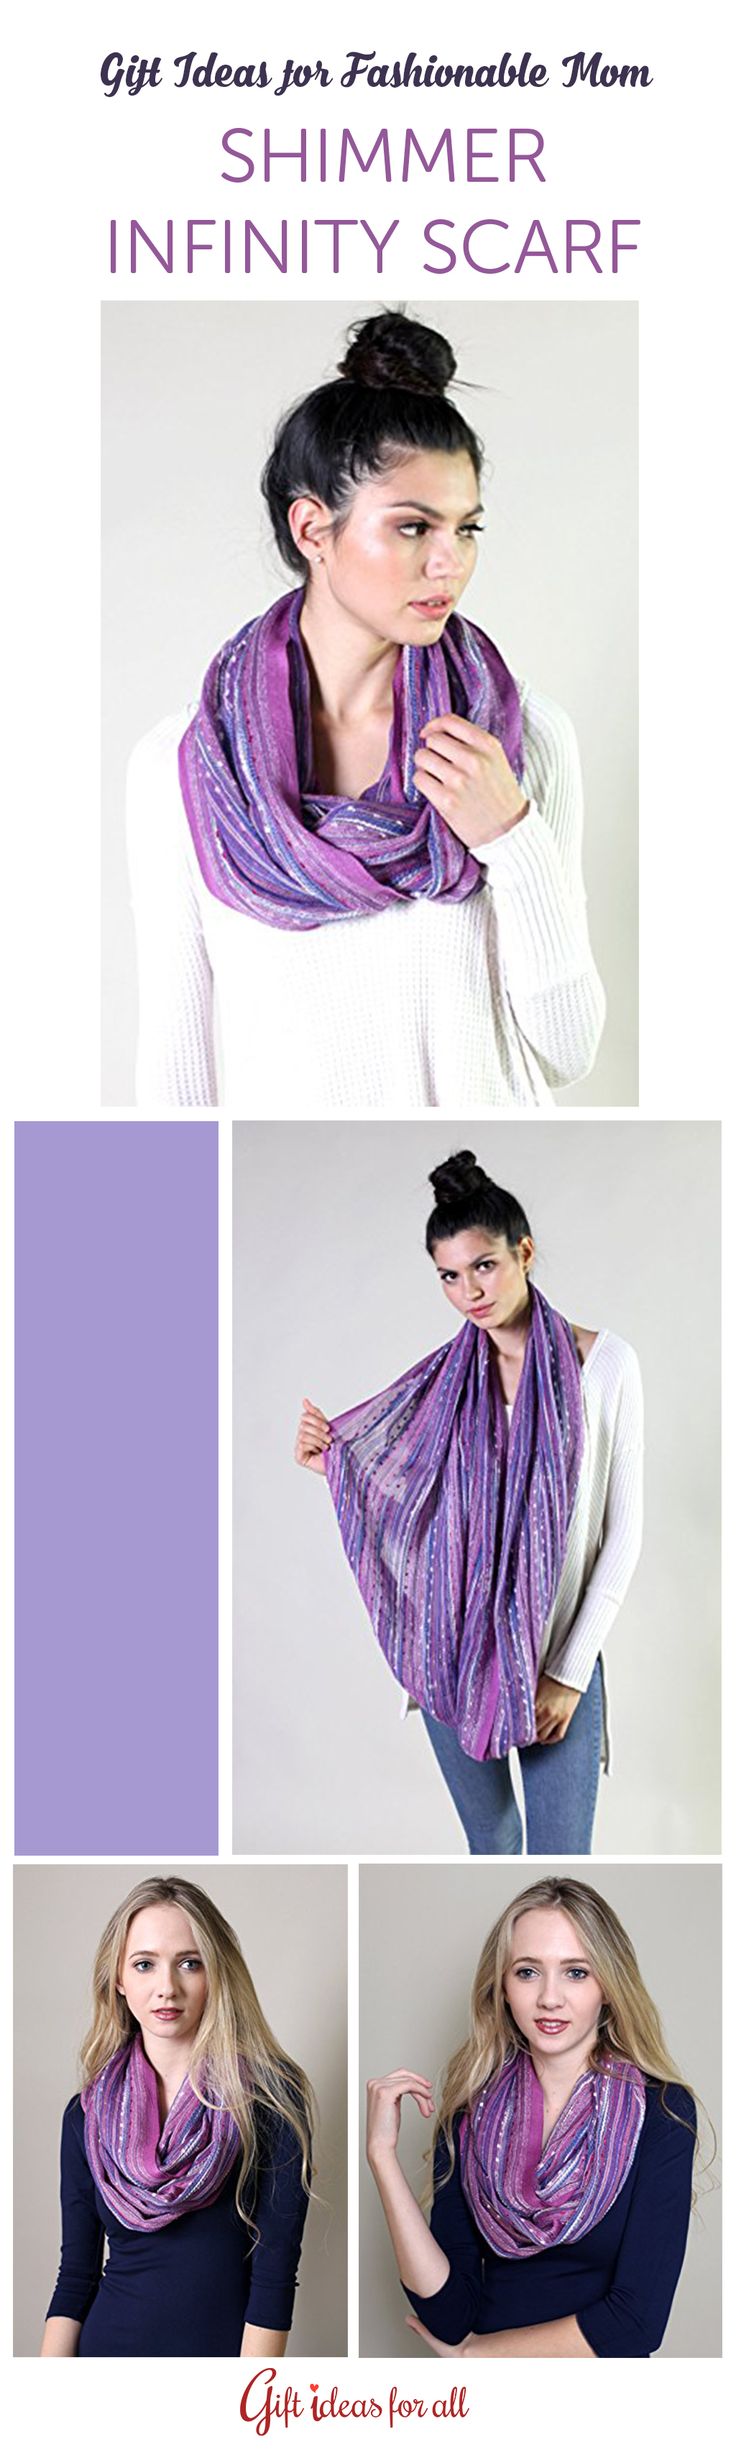 Shimmer Infinity Scarf - #gift items for Mother’s Day. #gifts #mothersday #mot...